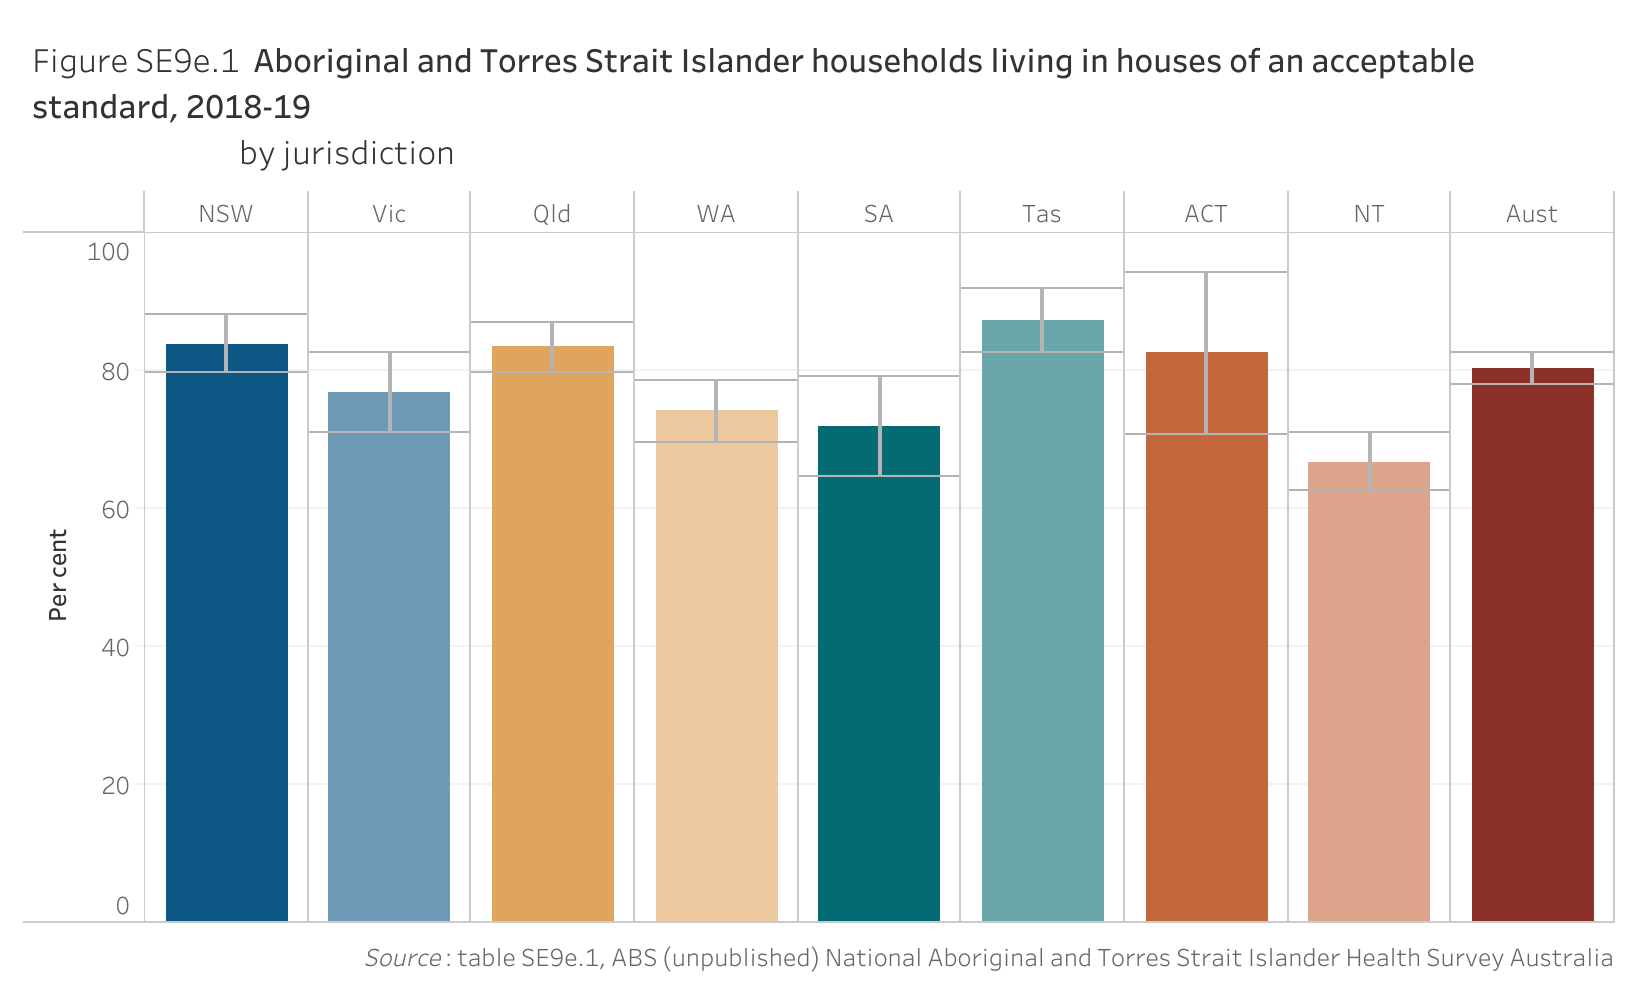 Figure SE9e.1. Bar chart showing the proportion of Aboriginal and Torres Strait Islander households living in houses of an acceptable standard in 2018-19, by jurisdiction. Data table of figure SE9e.1 is below.